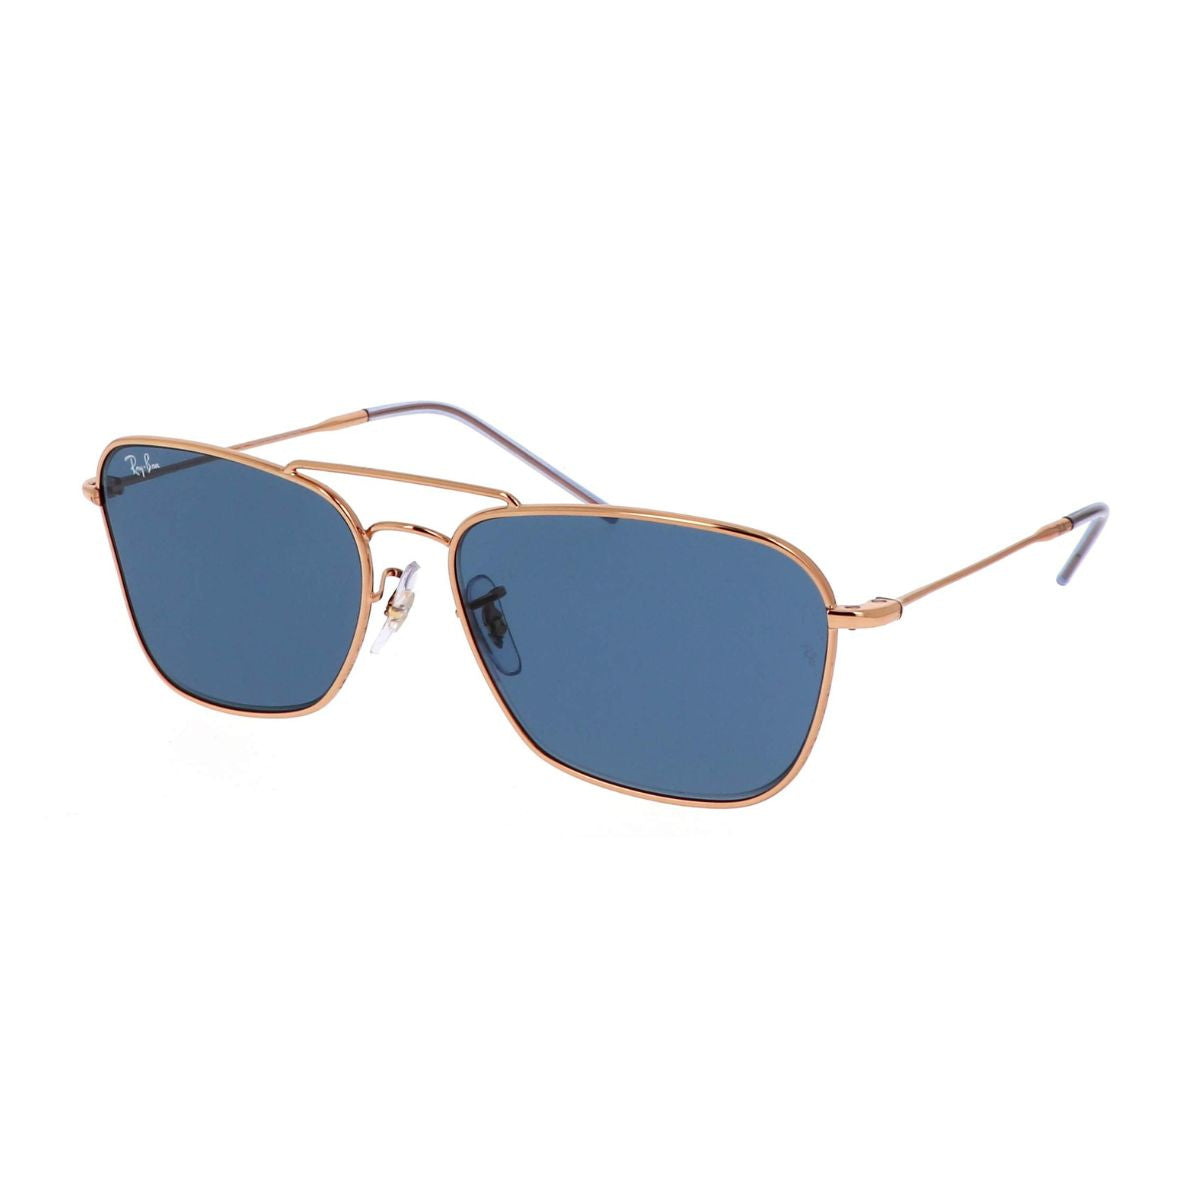 "Rayban 0102 9202/3a UV Protection Eyewear Sunglass For Men And Women At Optorium"